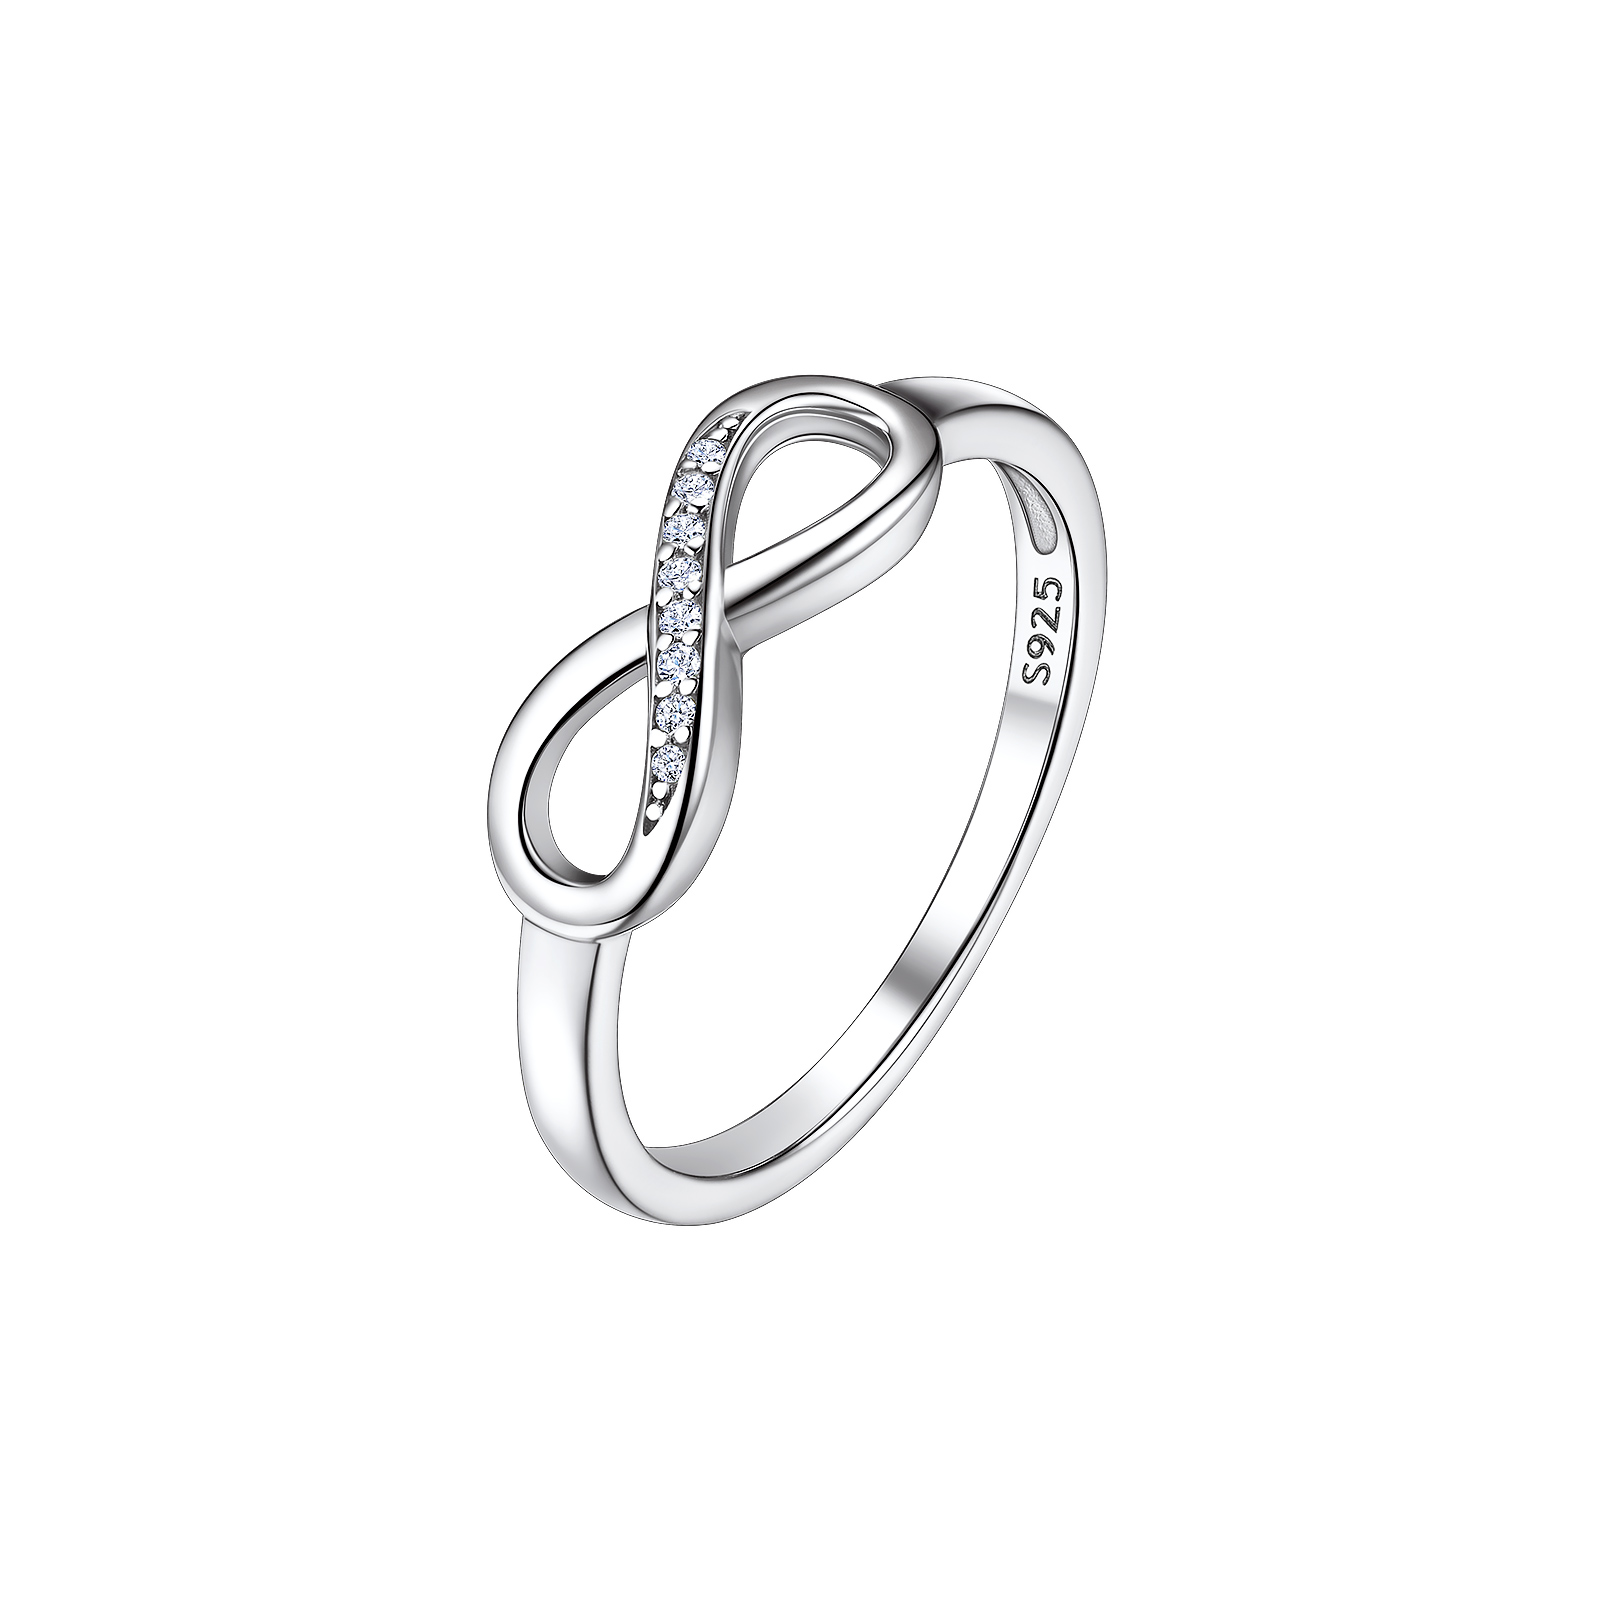 ChicSilver 925 Sterling Silver Infinity Ring For Women 